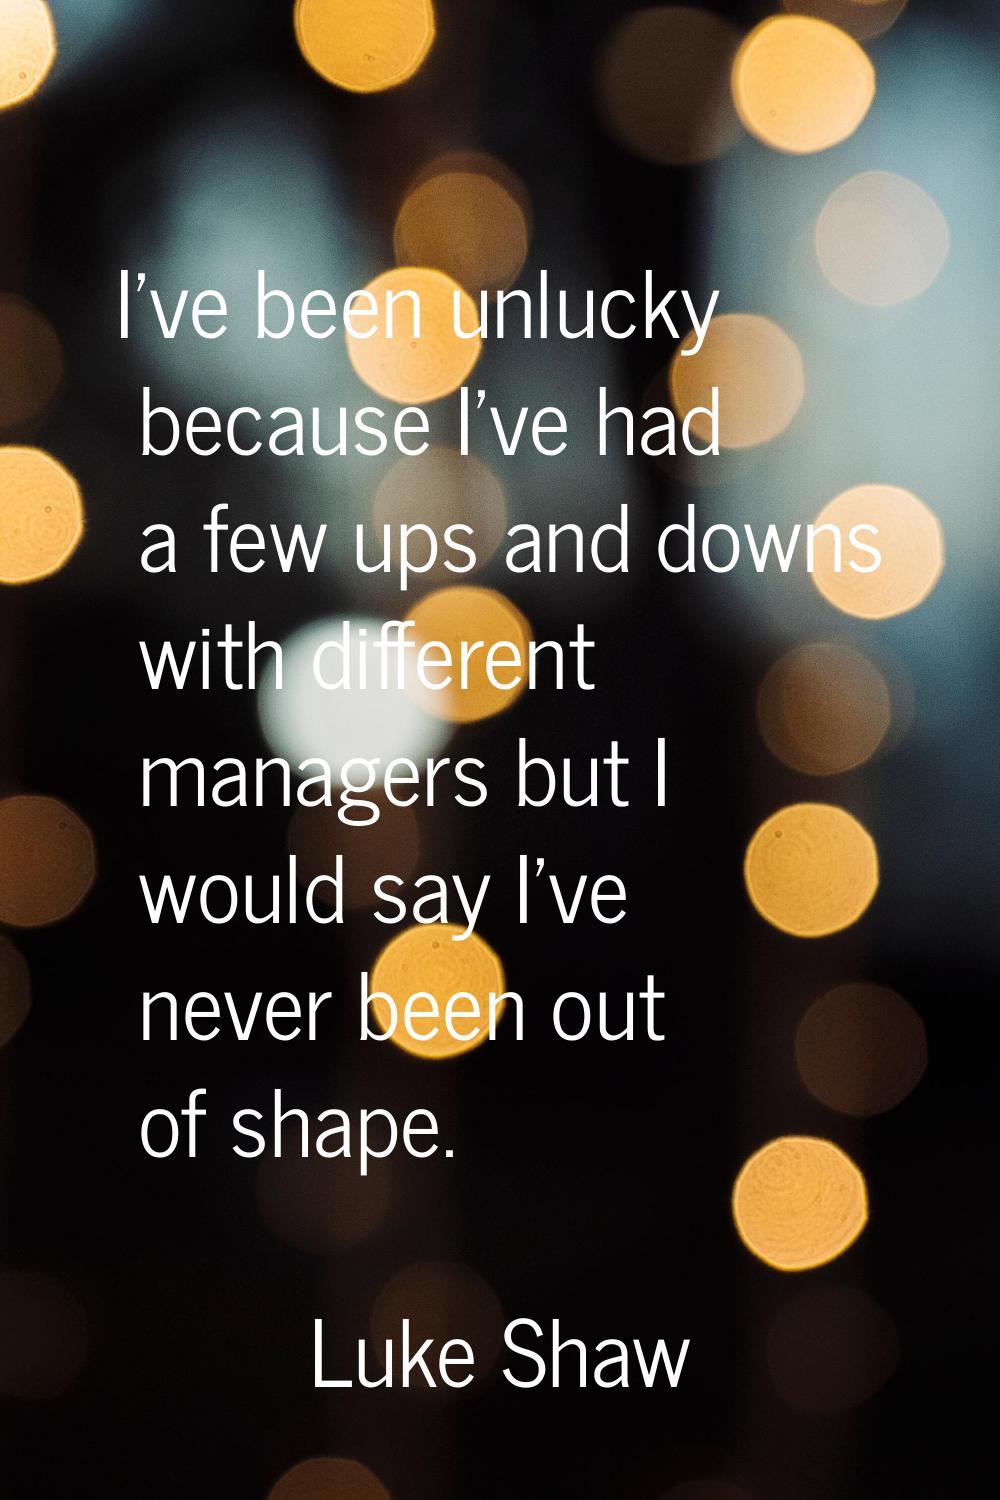 I've been unlucky because I've had a few ups and downs with different managers but I would say I've